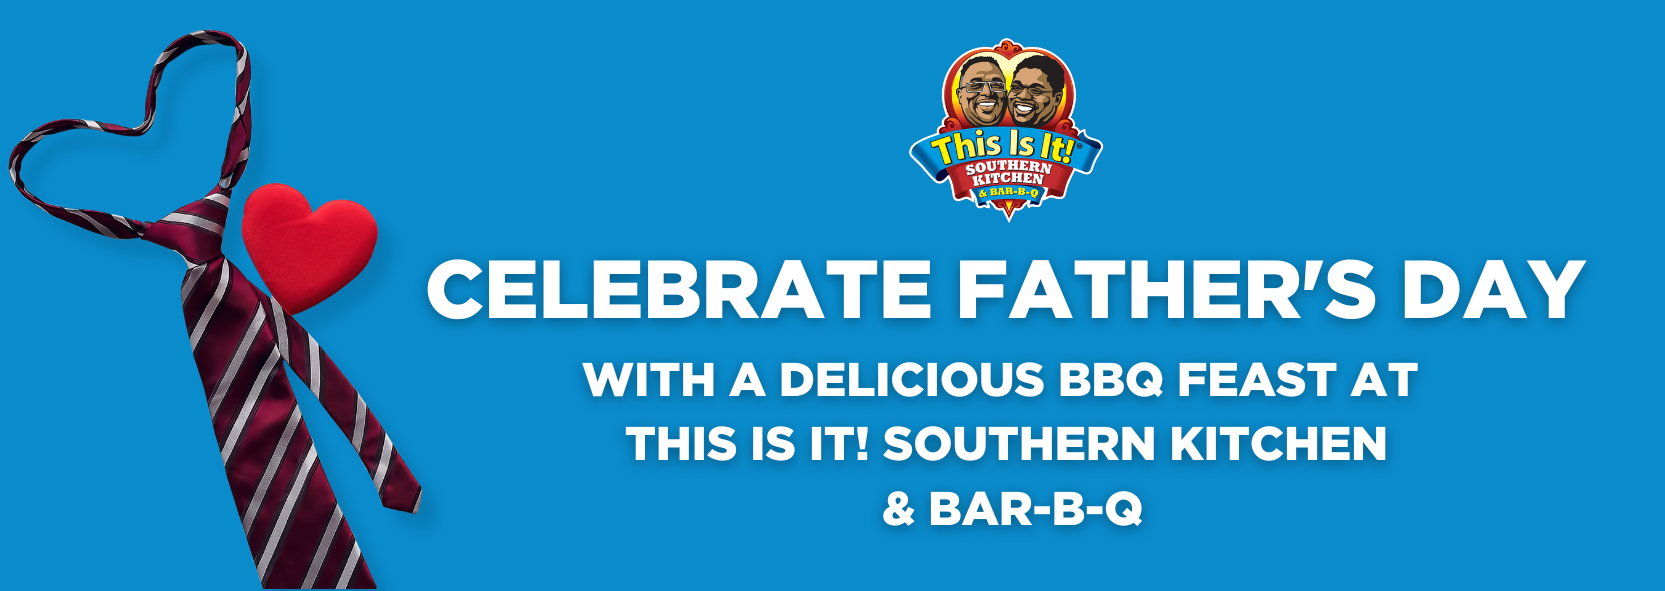 Celebrate Father's Day with a Delicious BBQ Feast at This Is It!